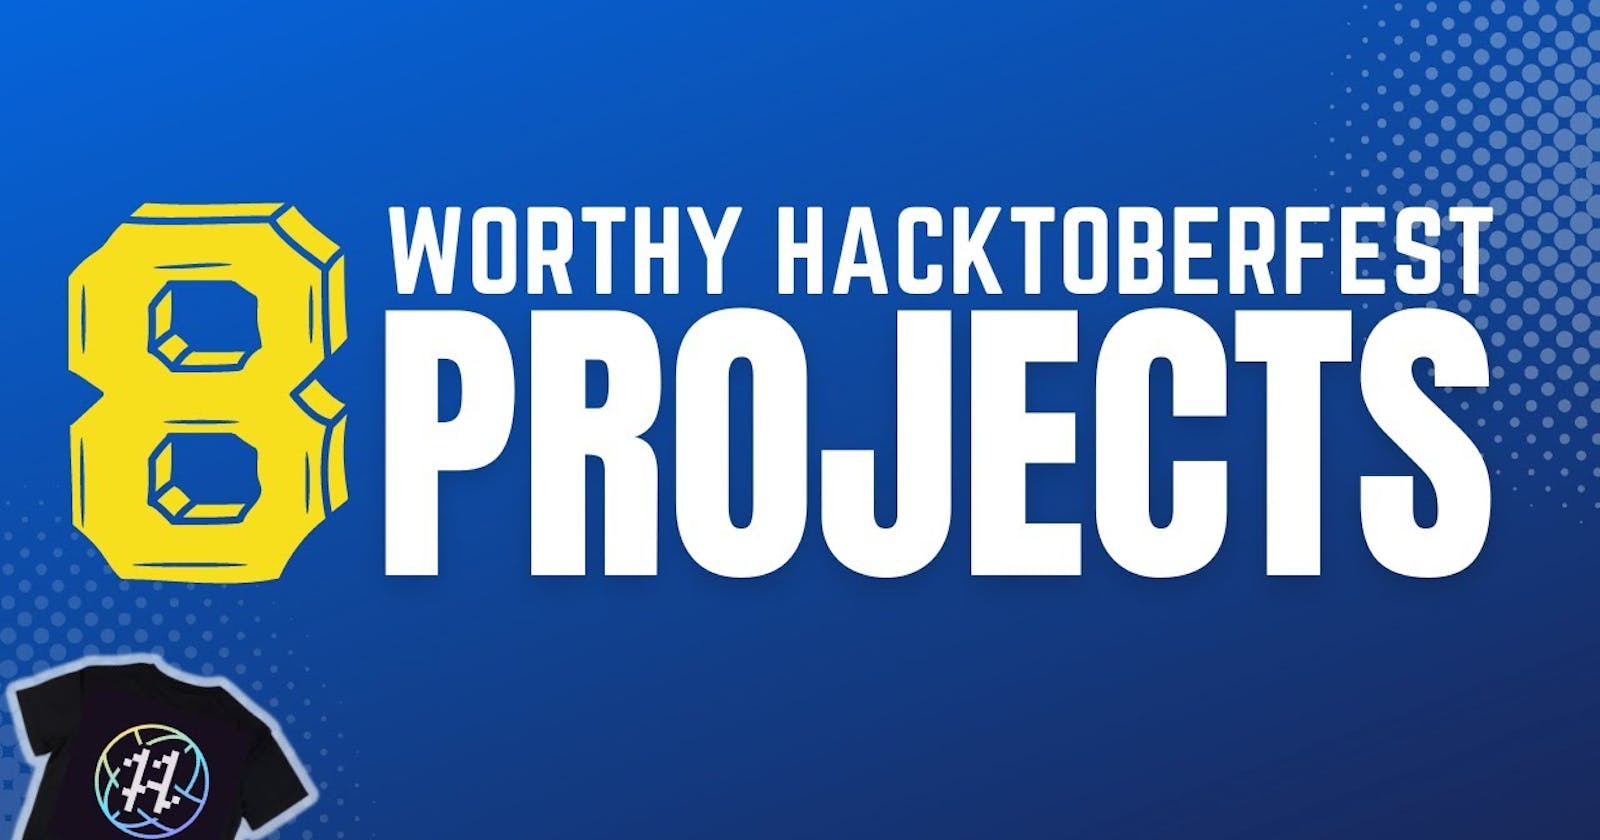 8 Worthy Hacktoberfest Projects You Can Contribute To